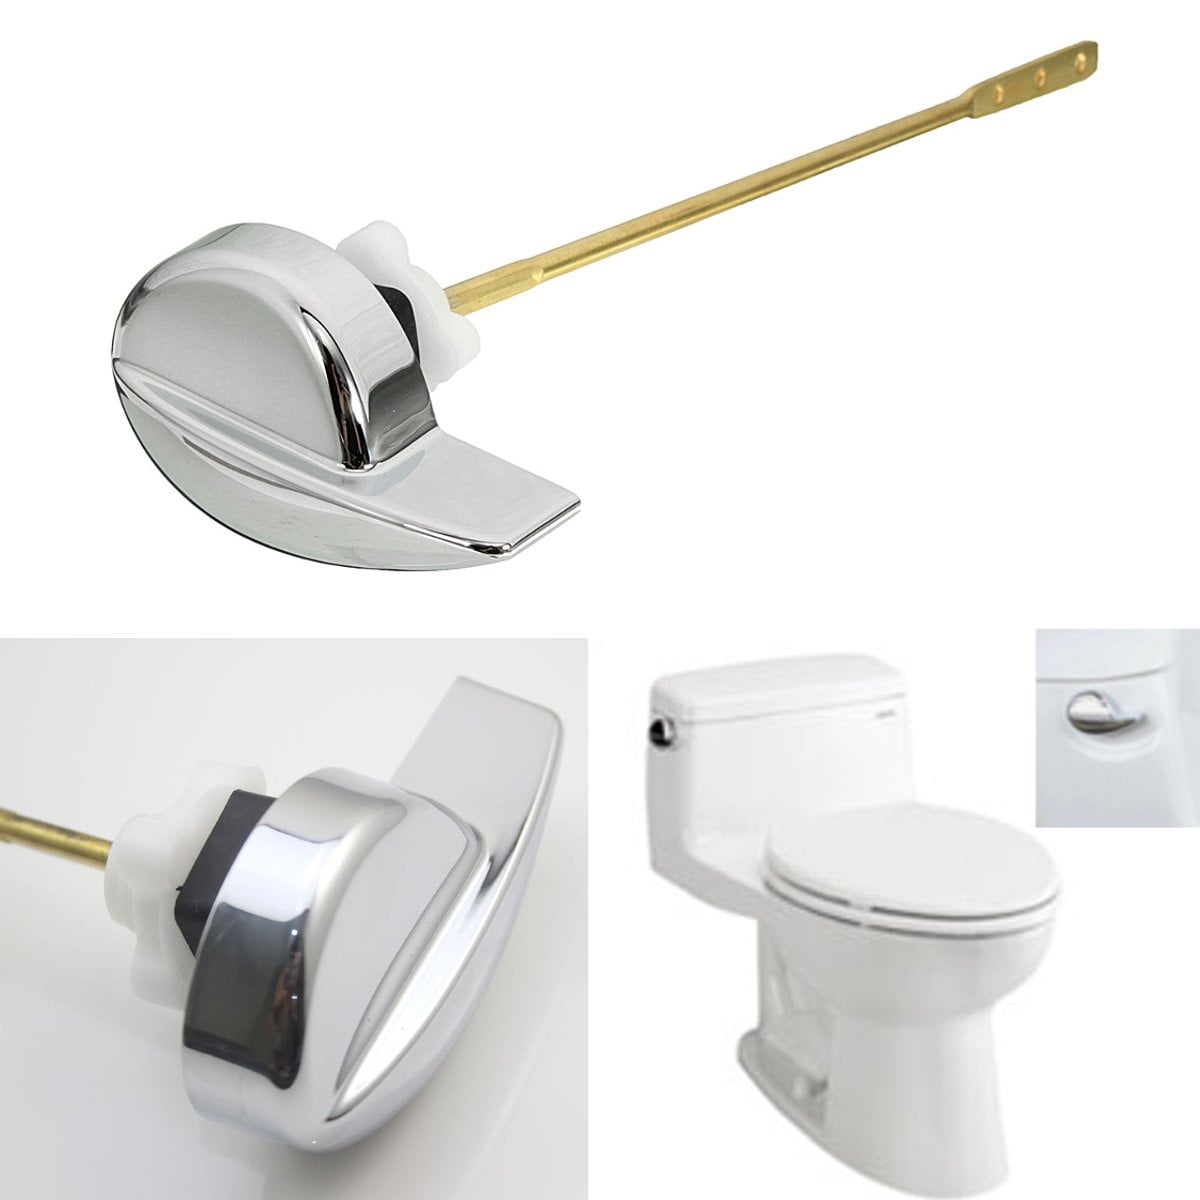 Details about   1 pc Angle Fitting Side Mount Toilet Lever Handle for TOTO Kohler Toilet Tank 